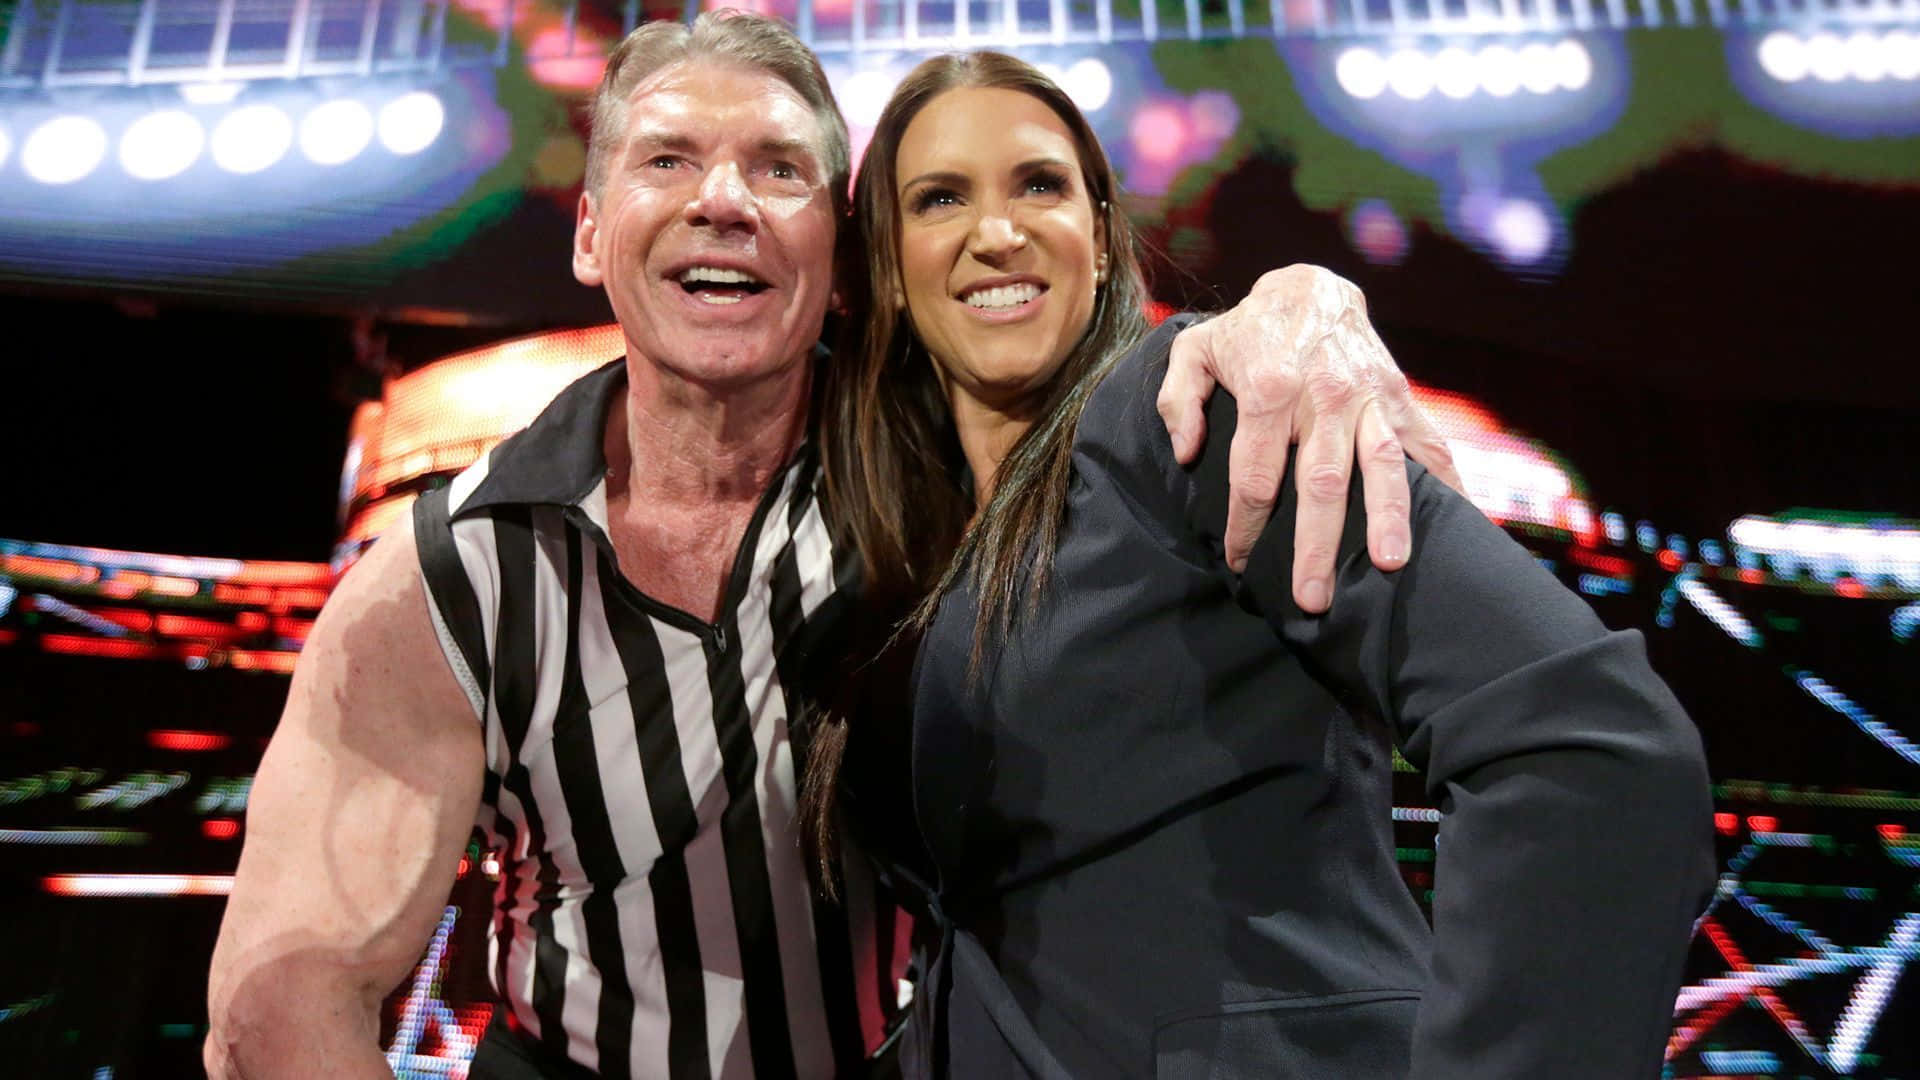 Vince Mcmahon And Stephanie Mcmahon Share A Moment Together Background